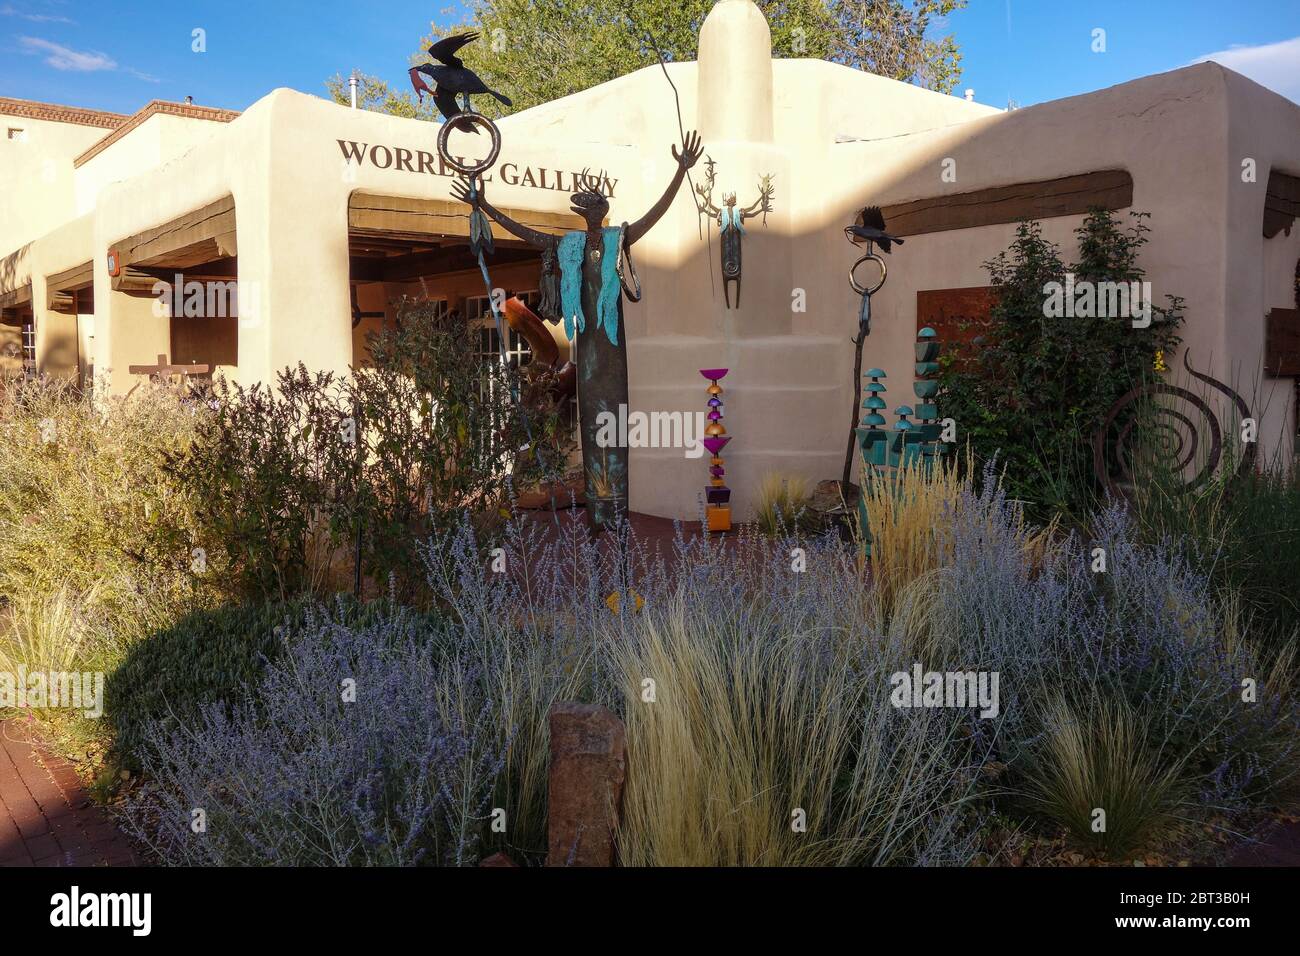 Statue by the entrance to Worrell Gallery, Santa Fe, NM Stock Photo